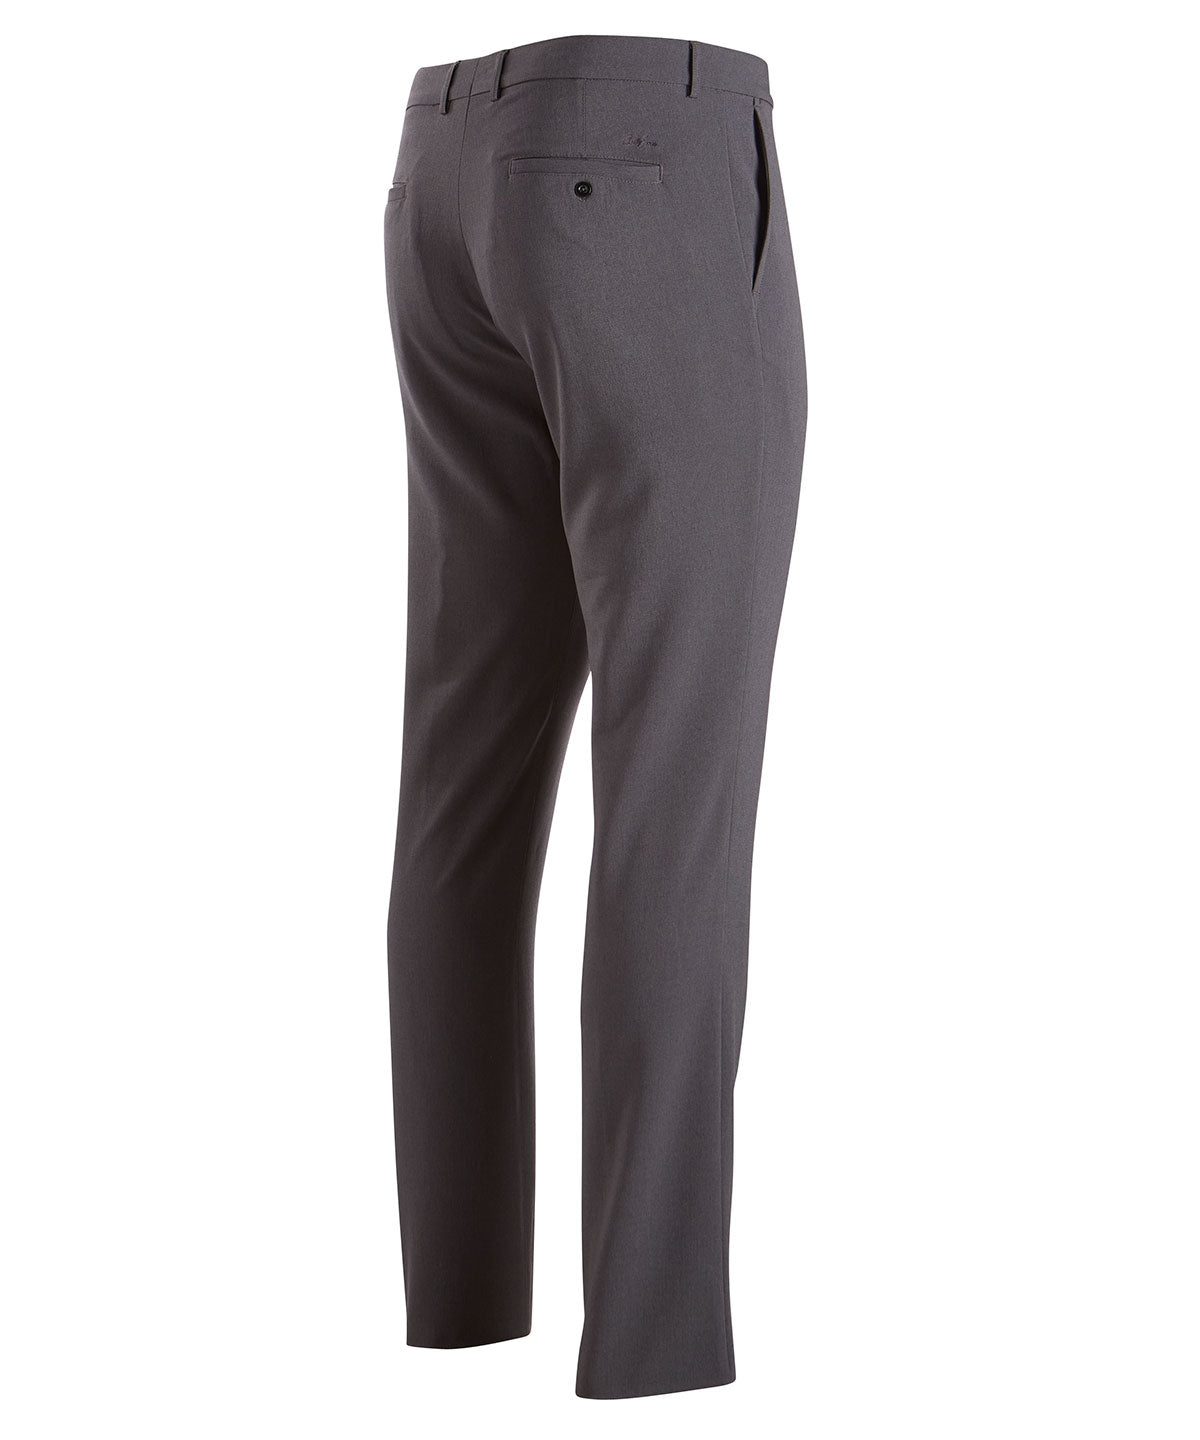 Performance Stretch Heather Trouser